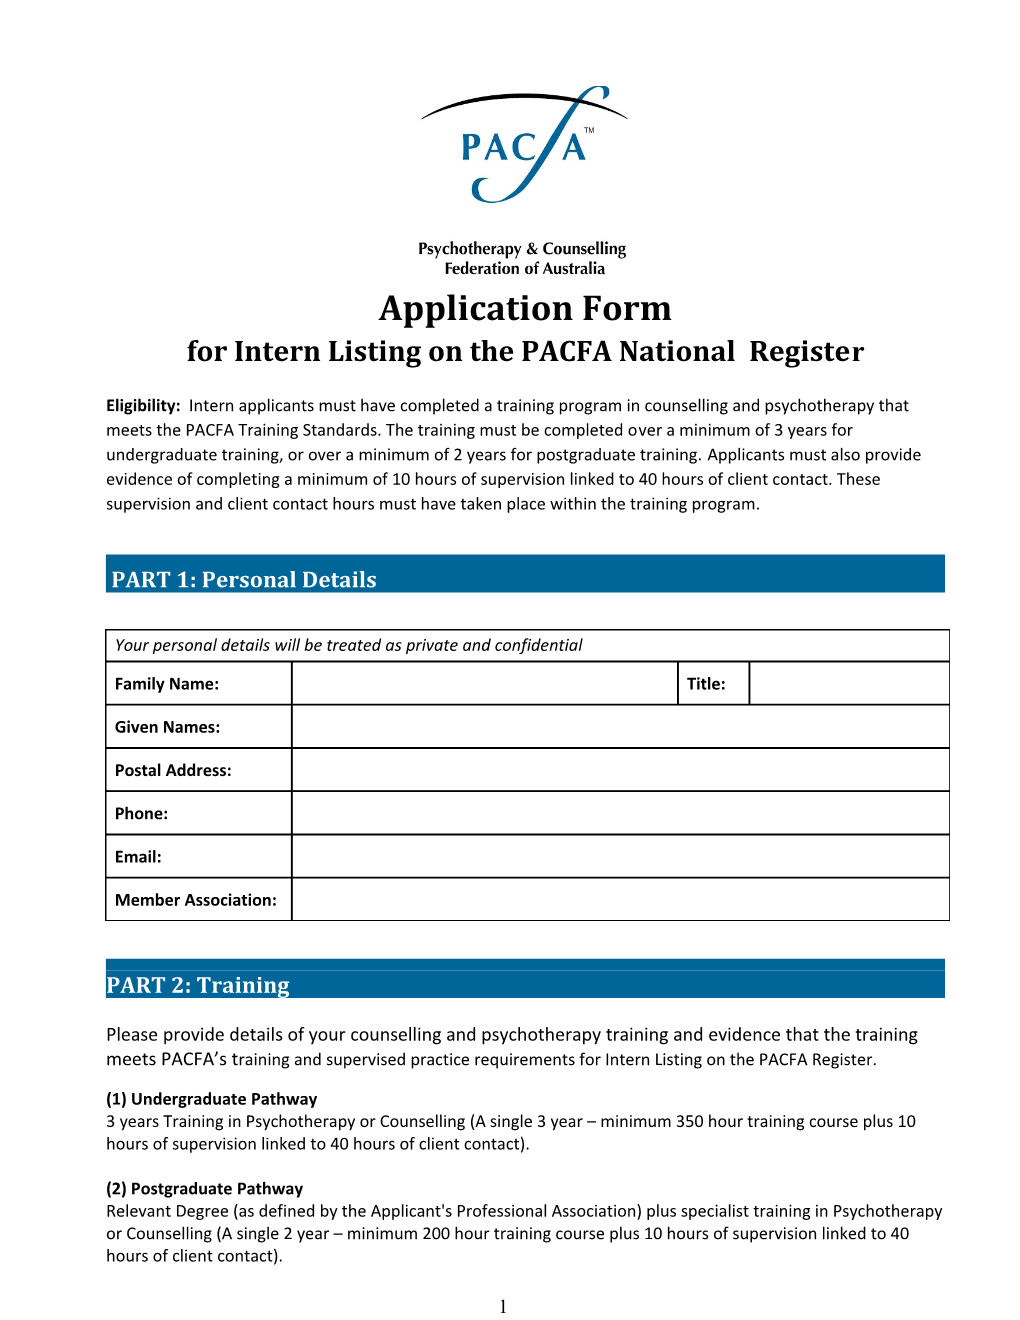 For Intern Listing on the PACFA National Register